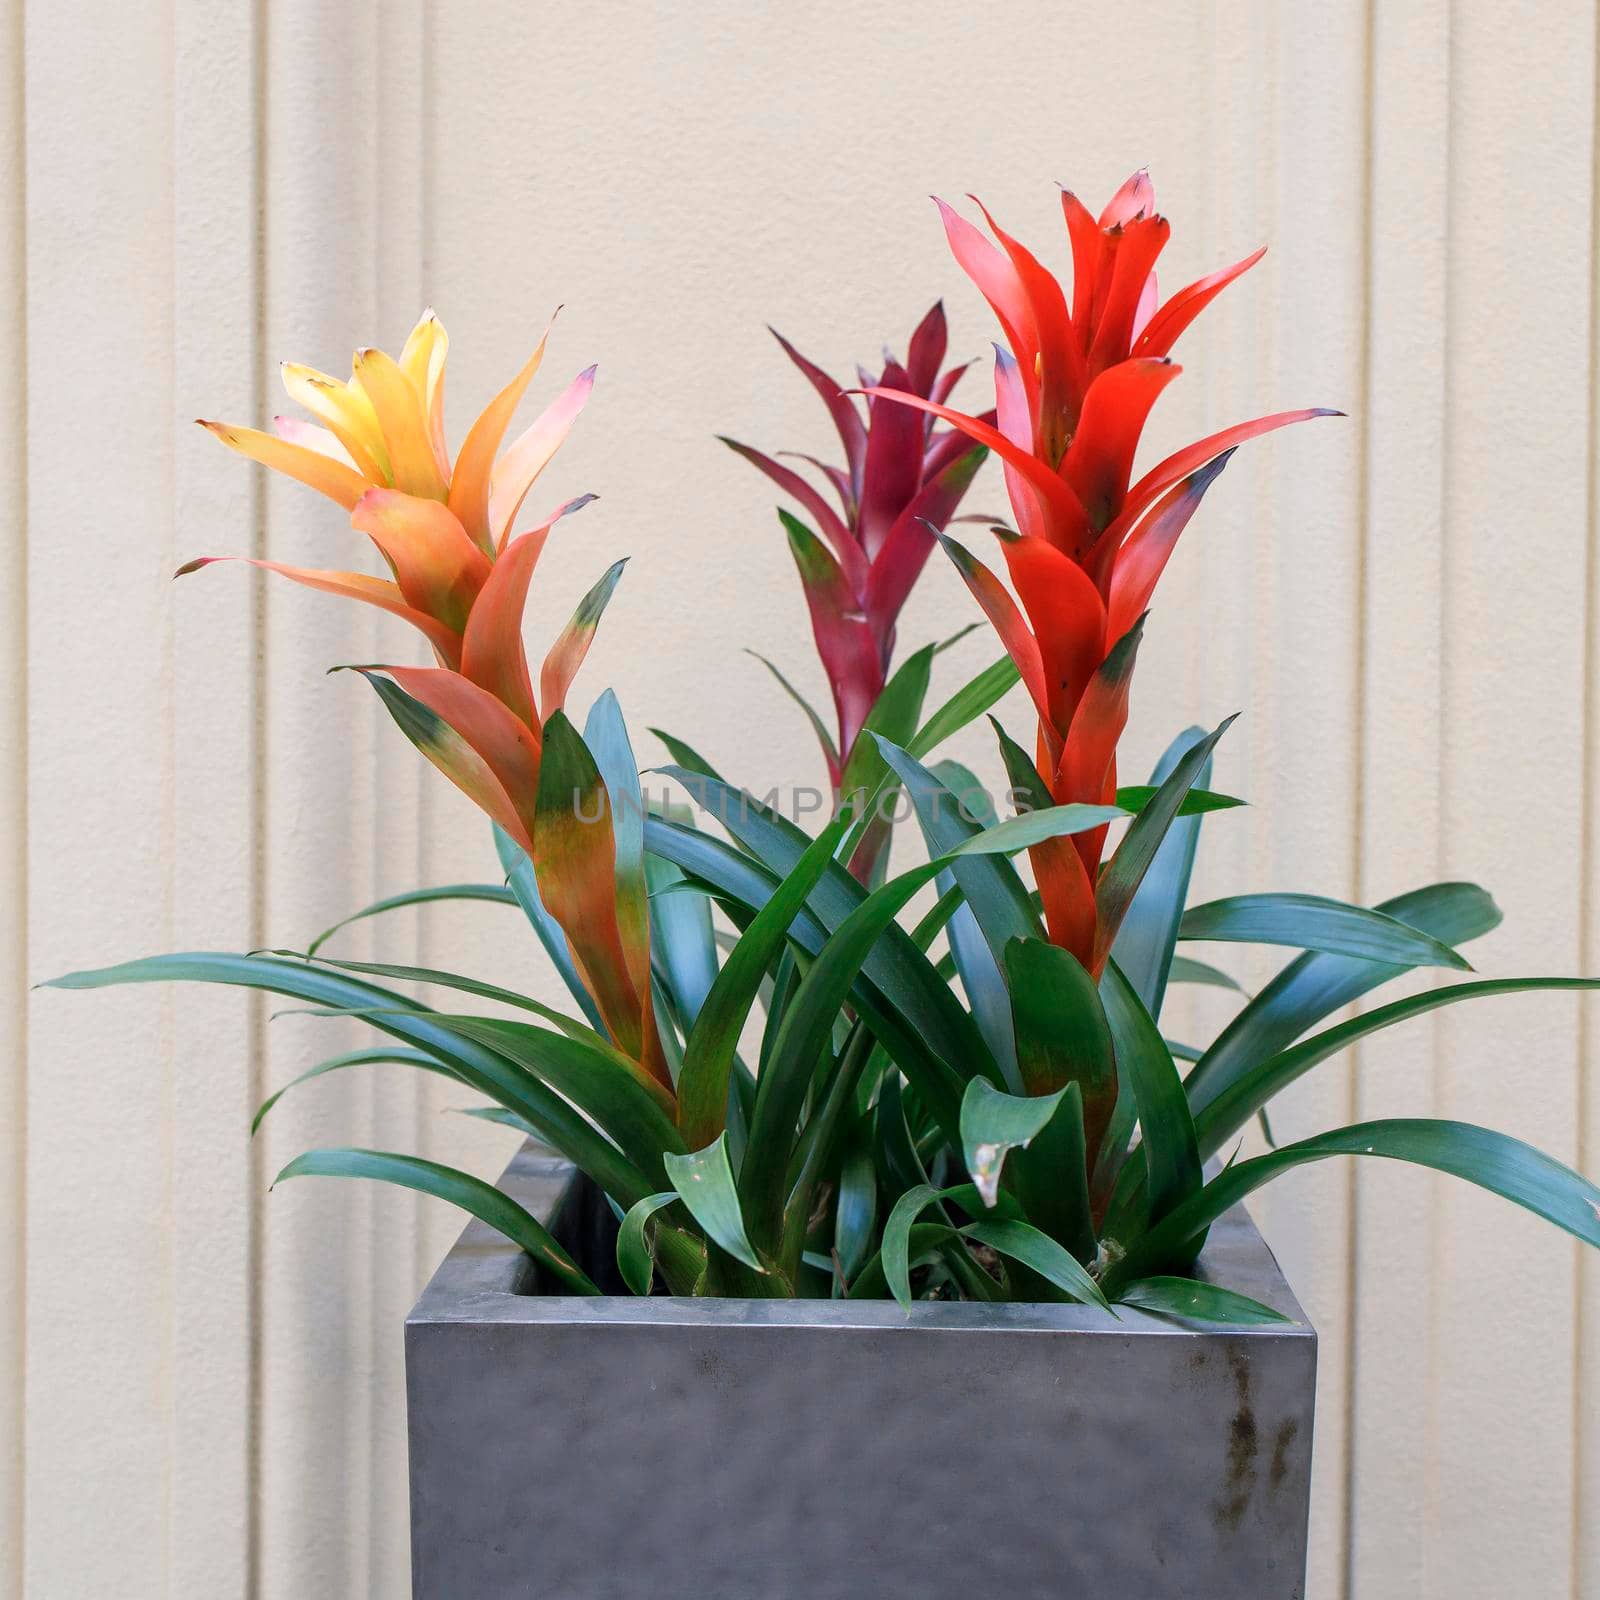 Yellow and red Guzmania in a large flower pot as an interior decoration